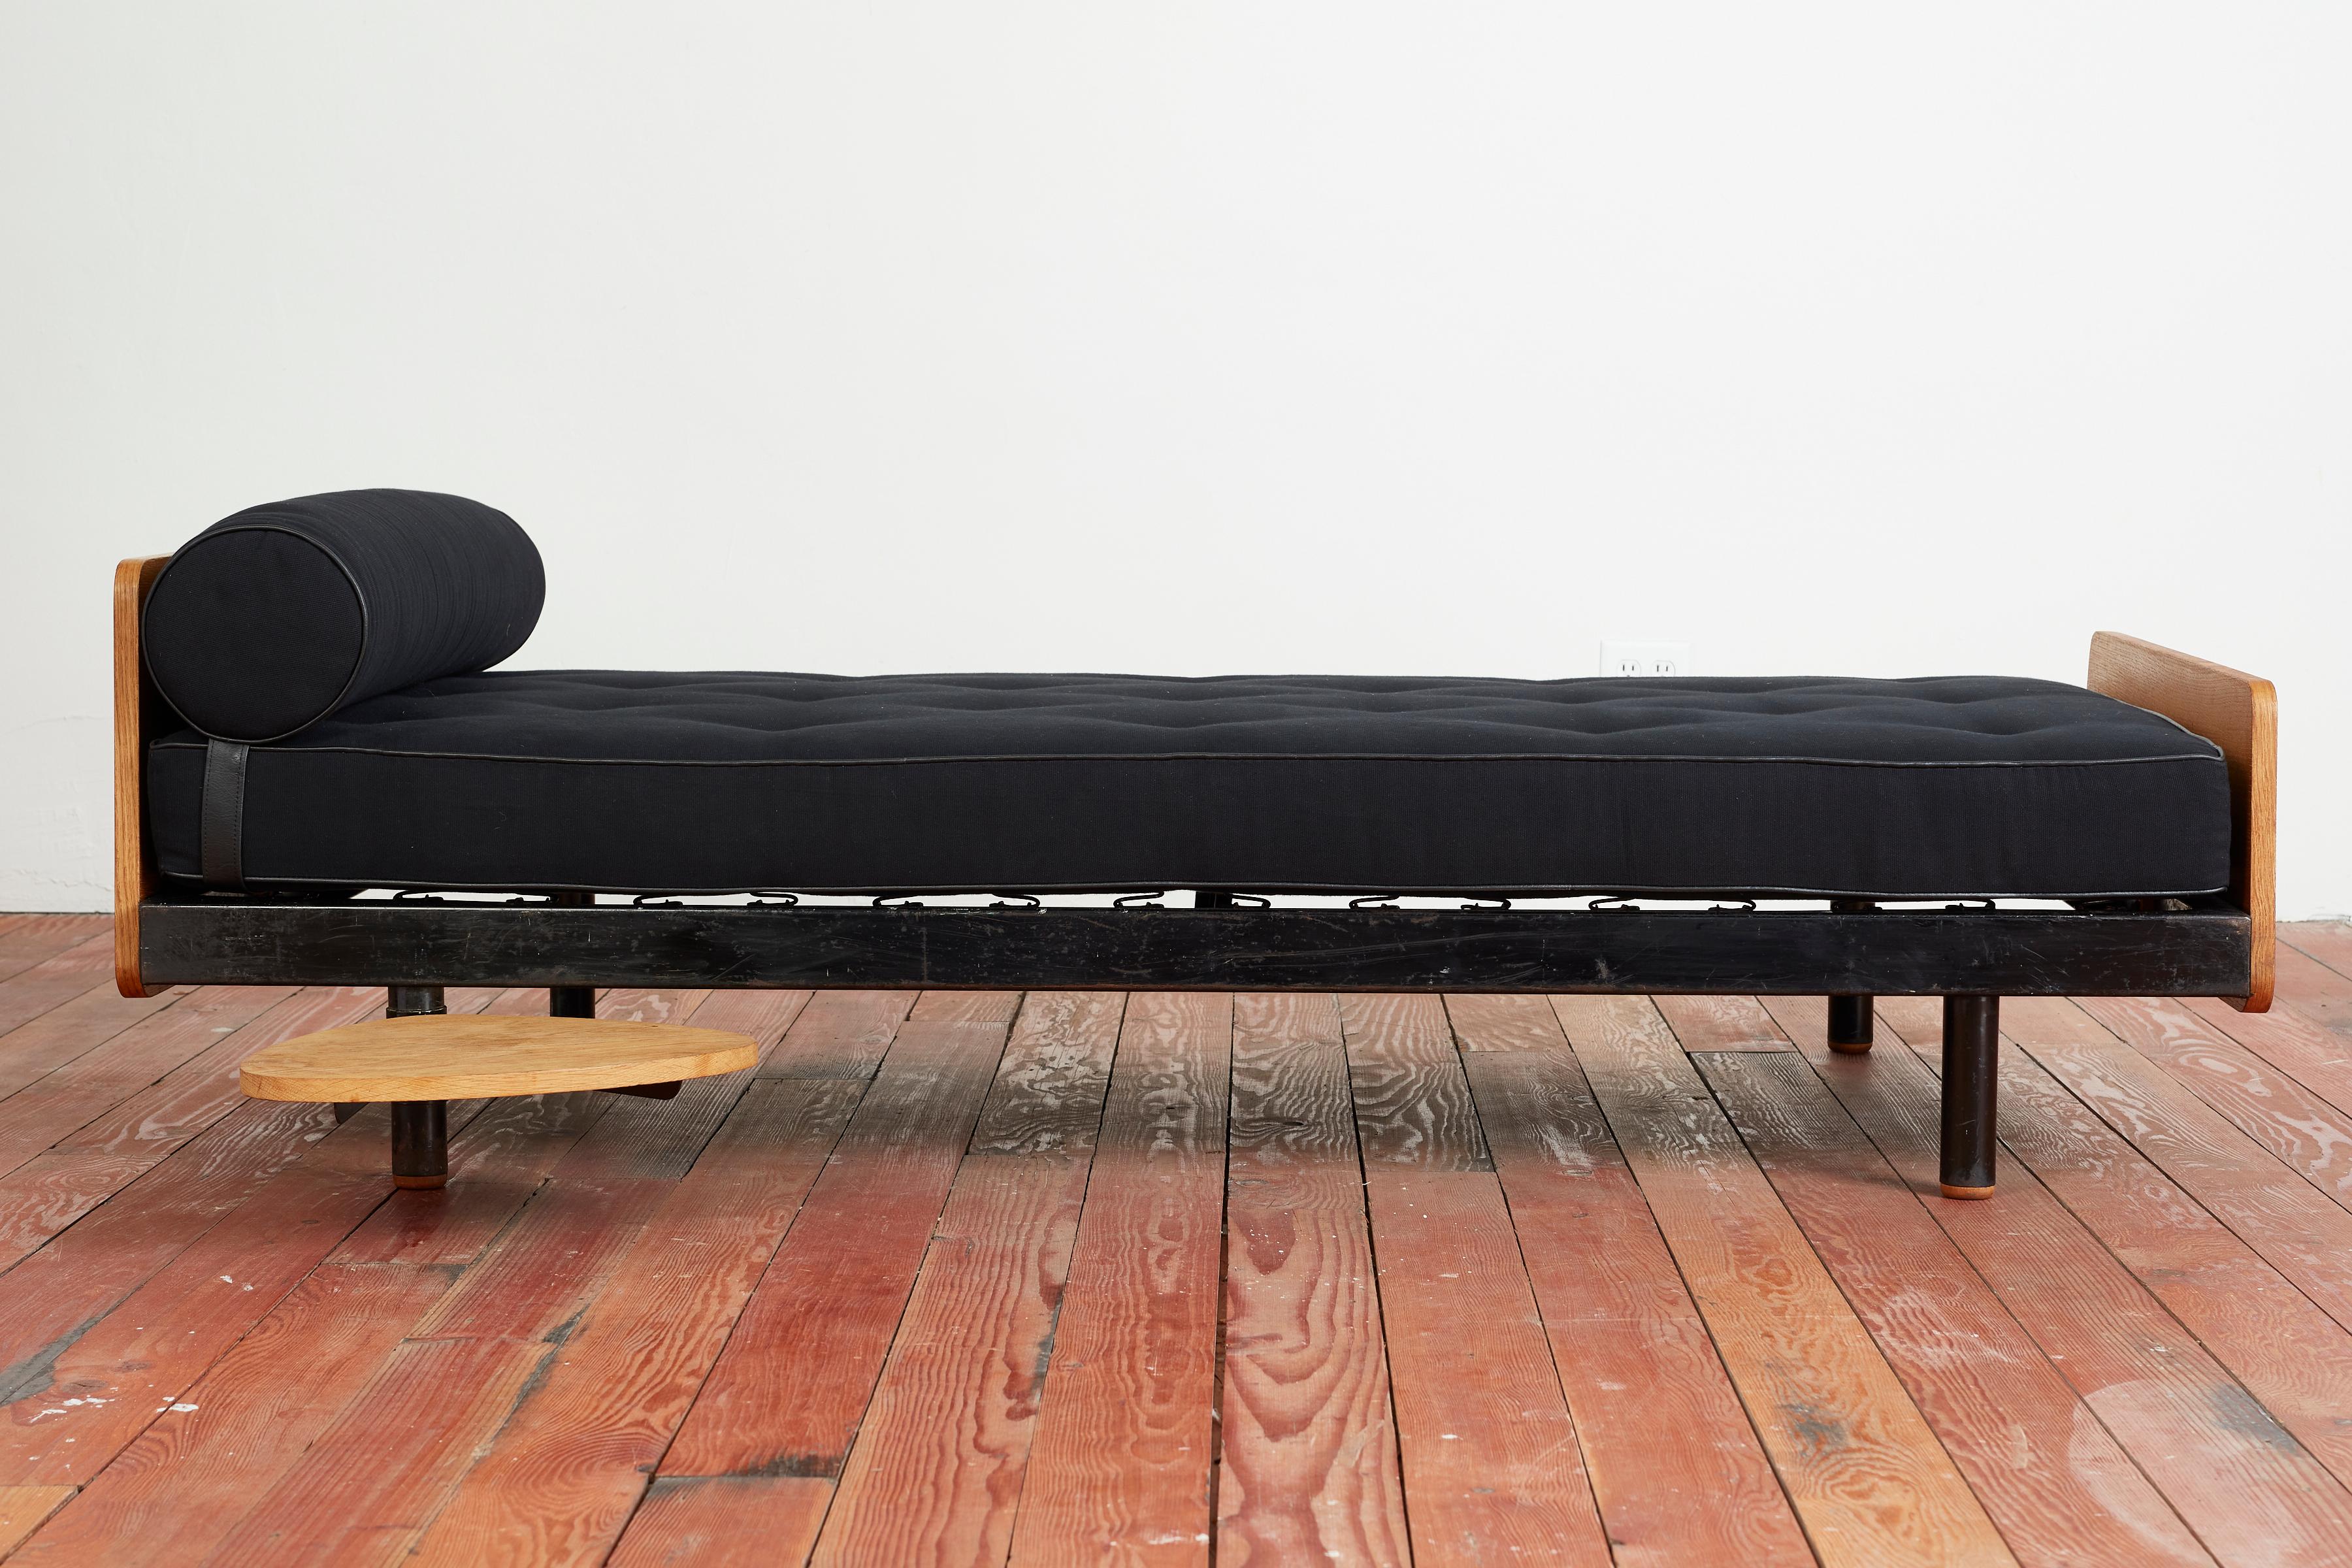 Original S.C.A.L. daybed designed by Jean Prouvé - France, 1954
Enameled steel frame, linen upholstery with original wood headboard and footboard. 
Daybed features signature swivel side table designed by Charlotte Perriand.
Good condition, with